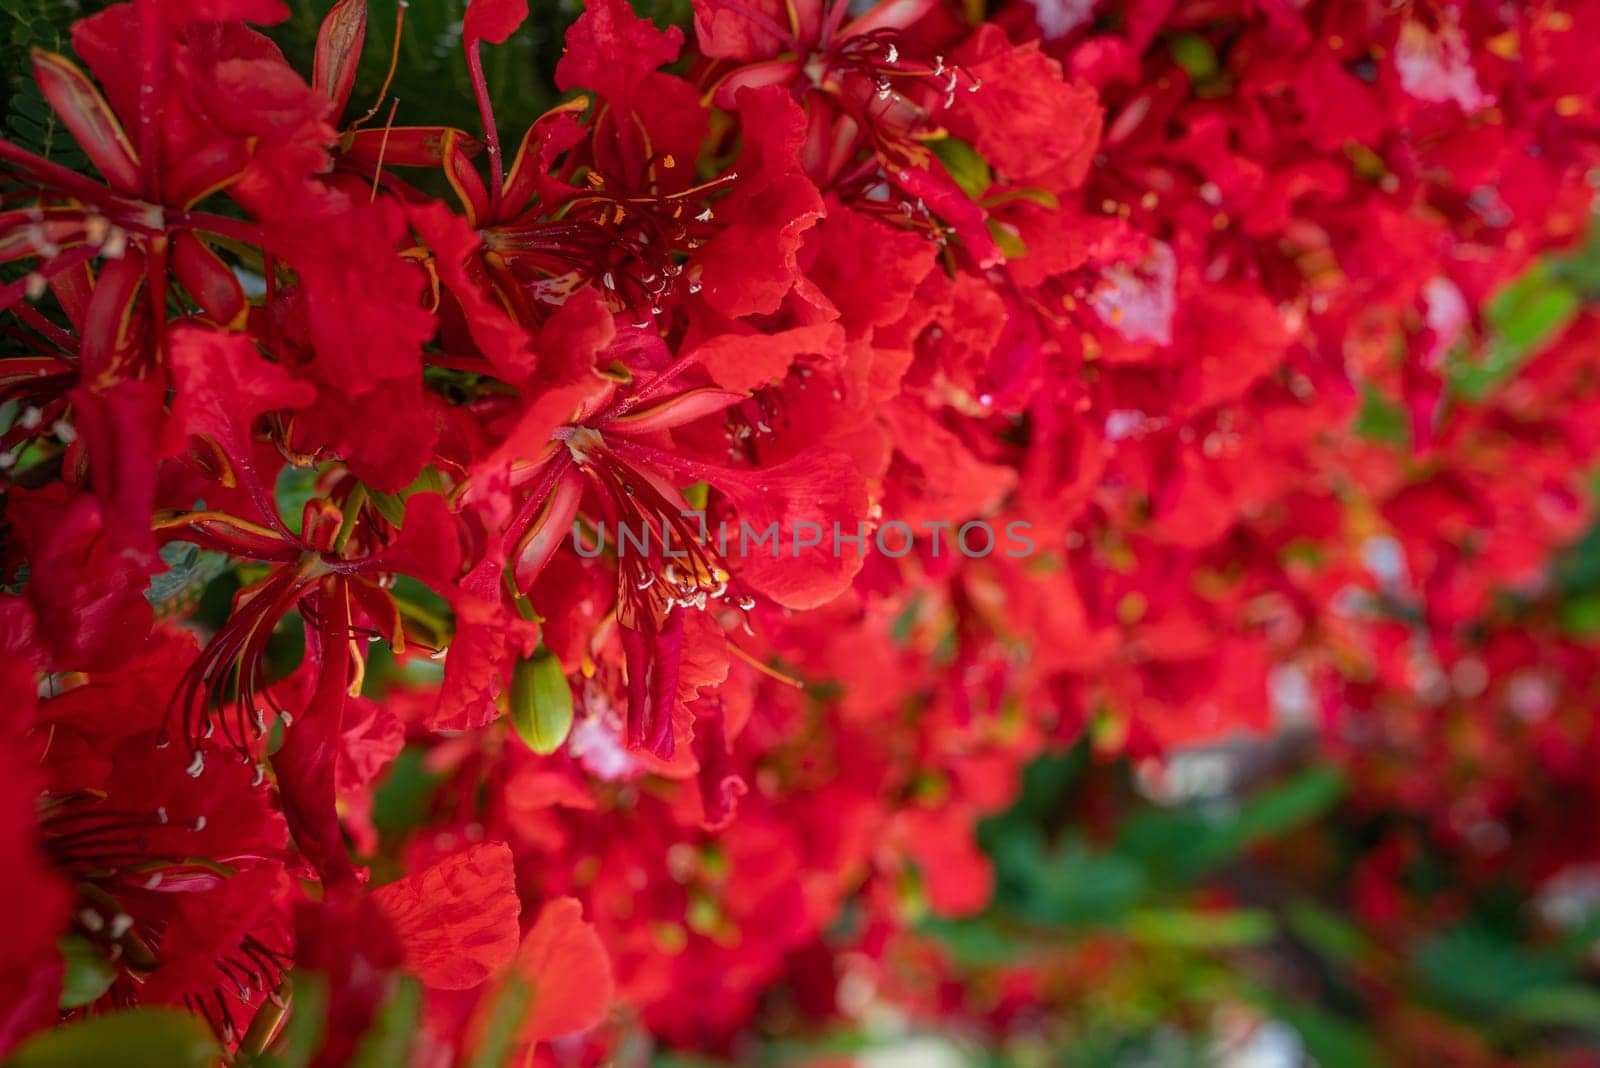 Delonix regia closeup. Red flowers background. A bean ornamental tree also known as royal poinciana, flamboyant, phoenix flower, flame of the forest or flame tree. Tropical flora